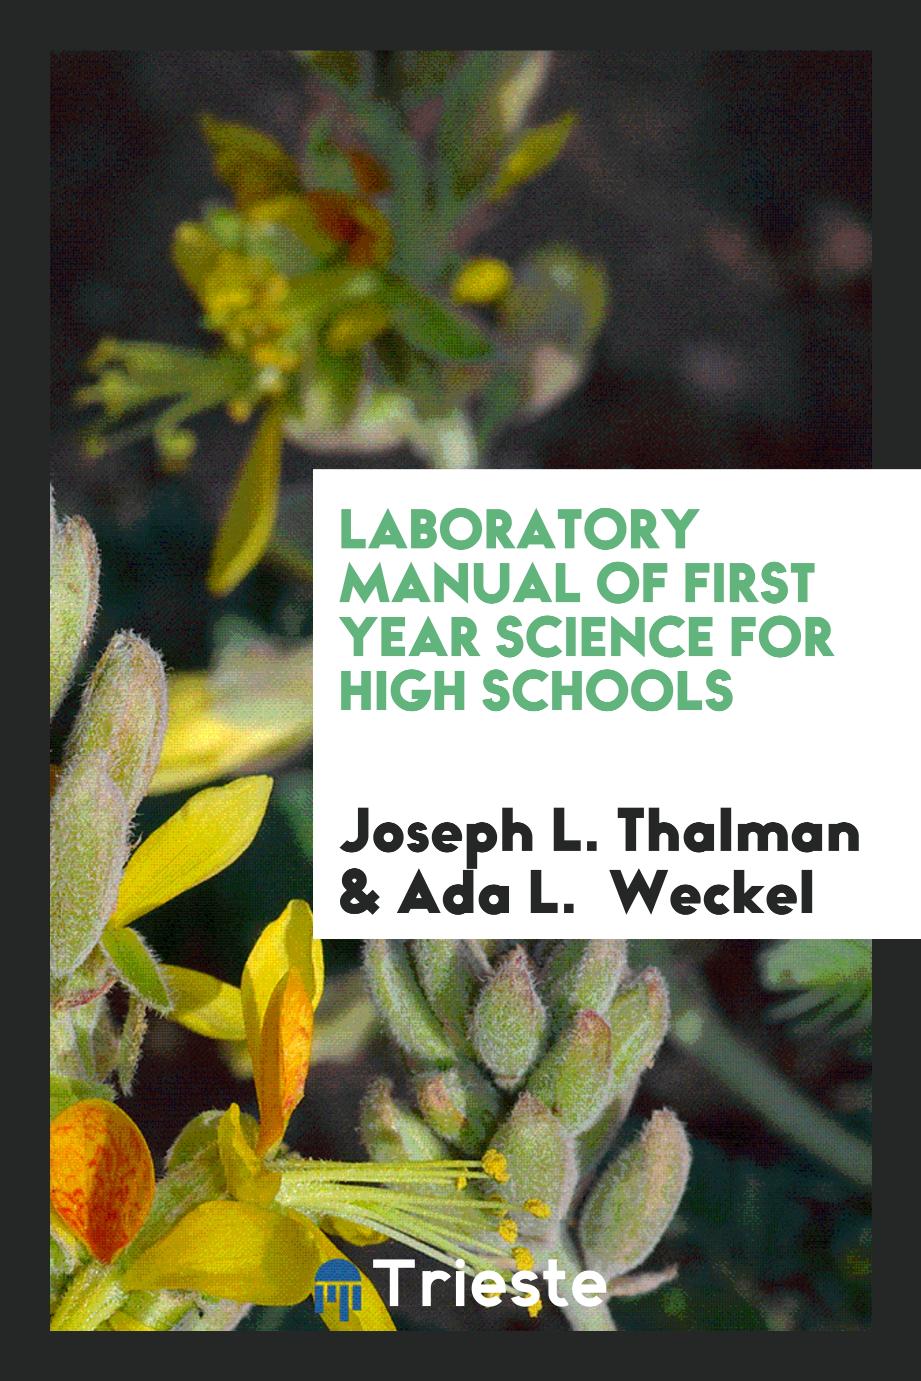 Laboratory Manual of First Year Science for High Schools